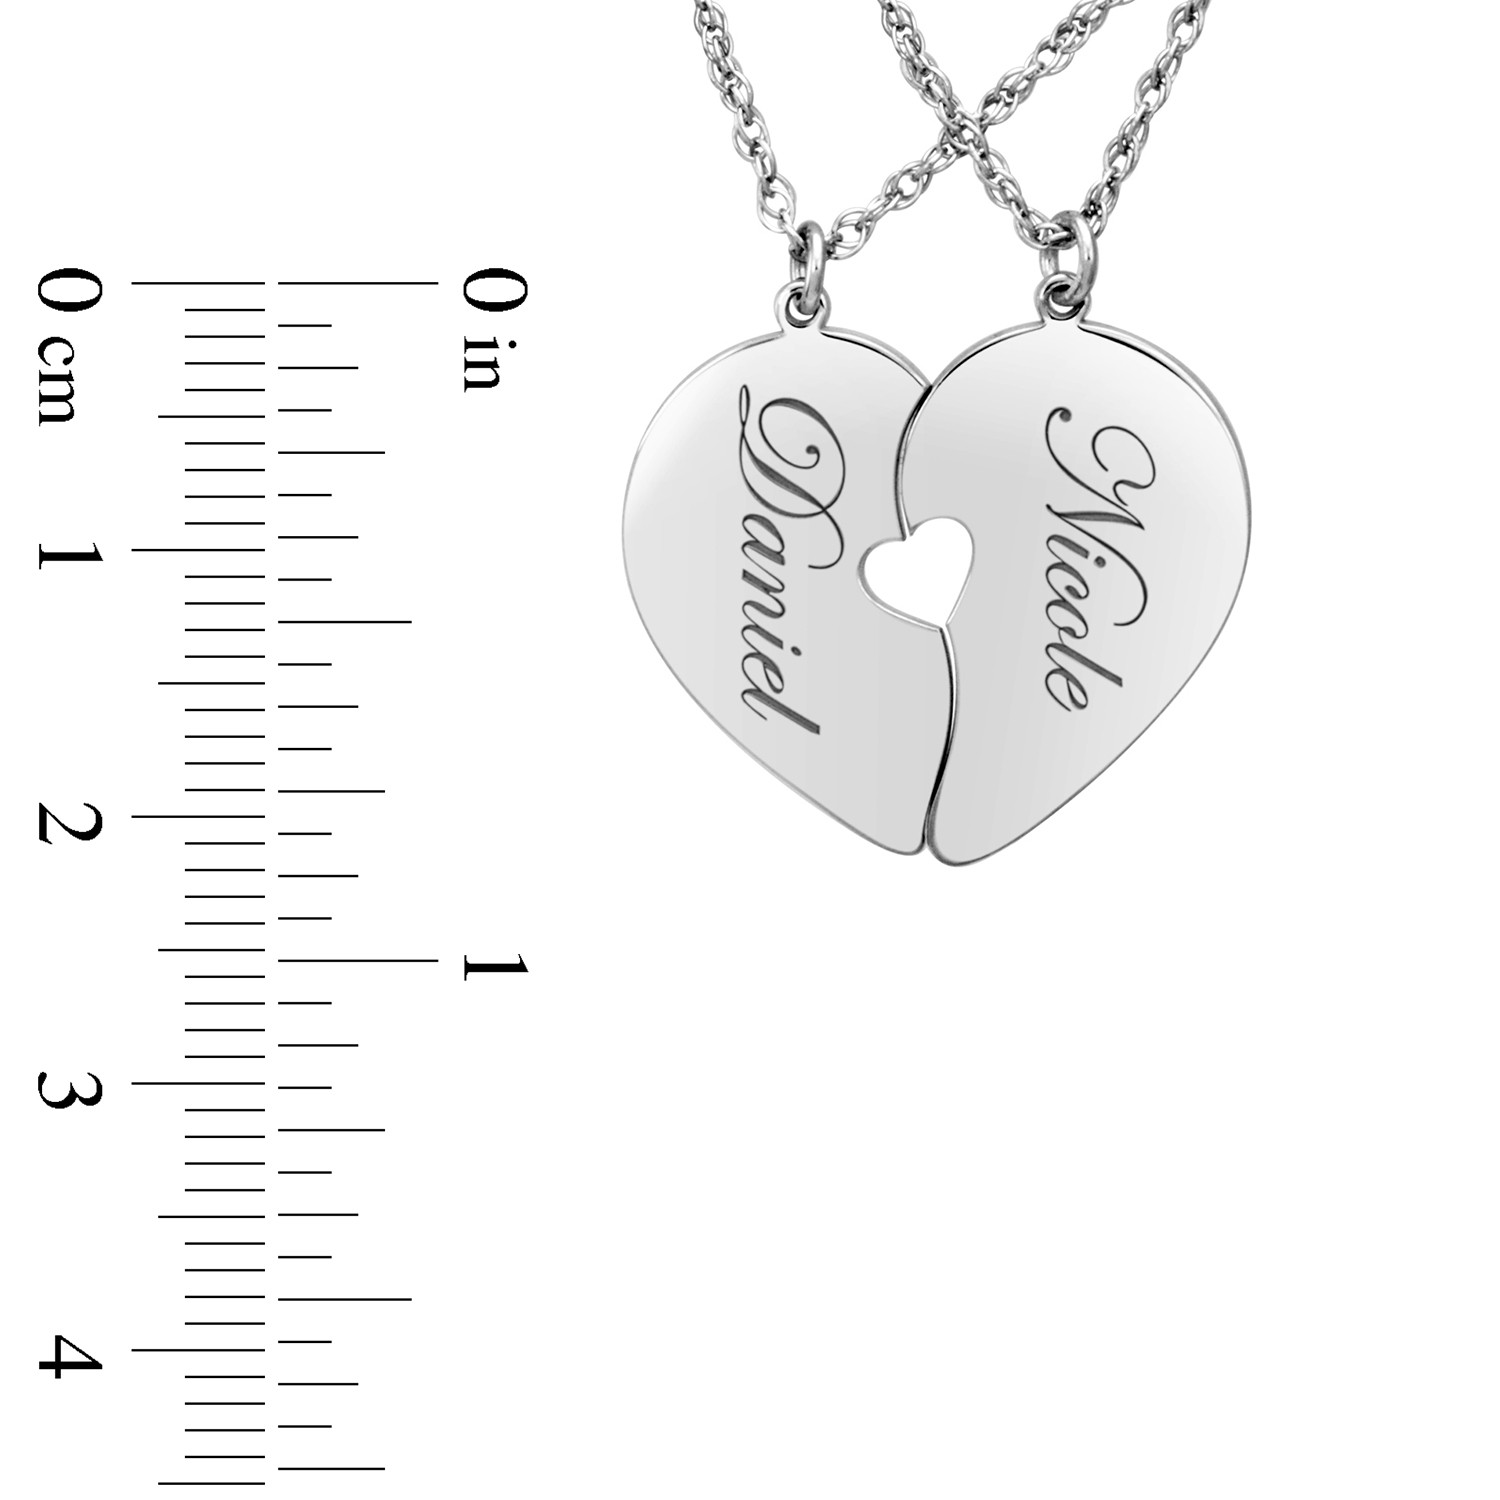 JSDDE Couples Heart Necklace Classic White and Black Matching Heart Pendant Necklaces for His and Hers Boyfriend Girlfriend Valentines Gift 